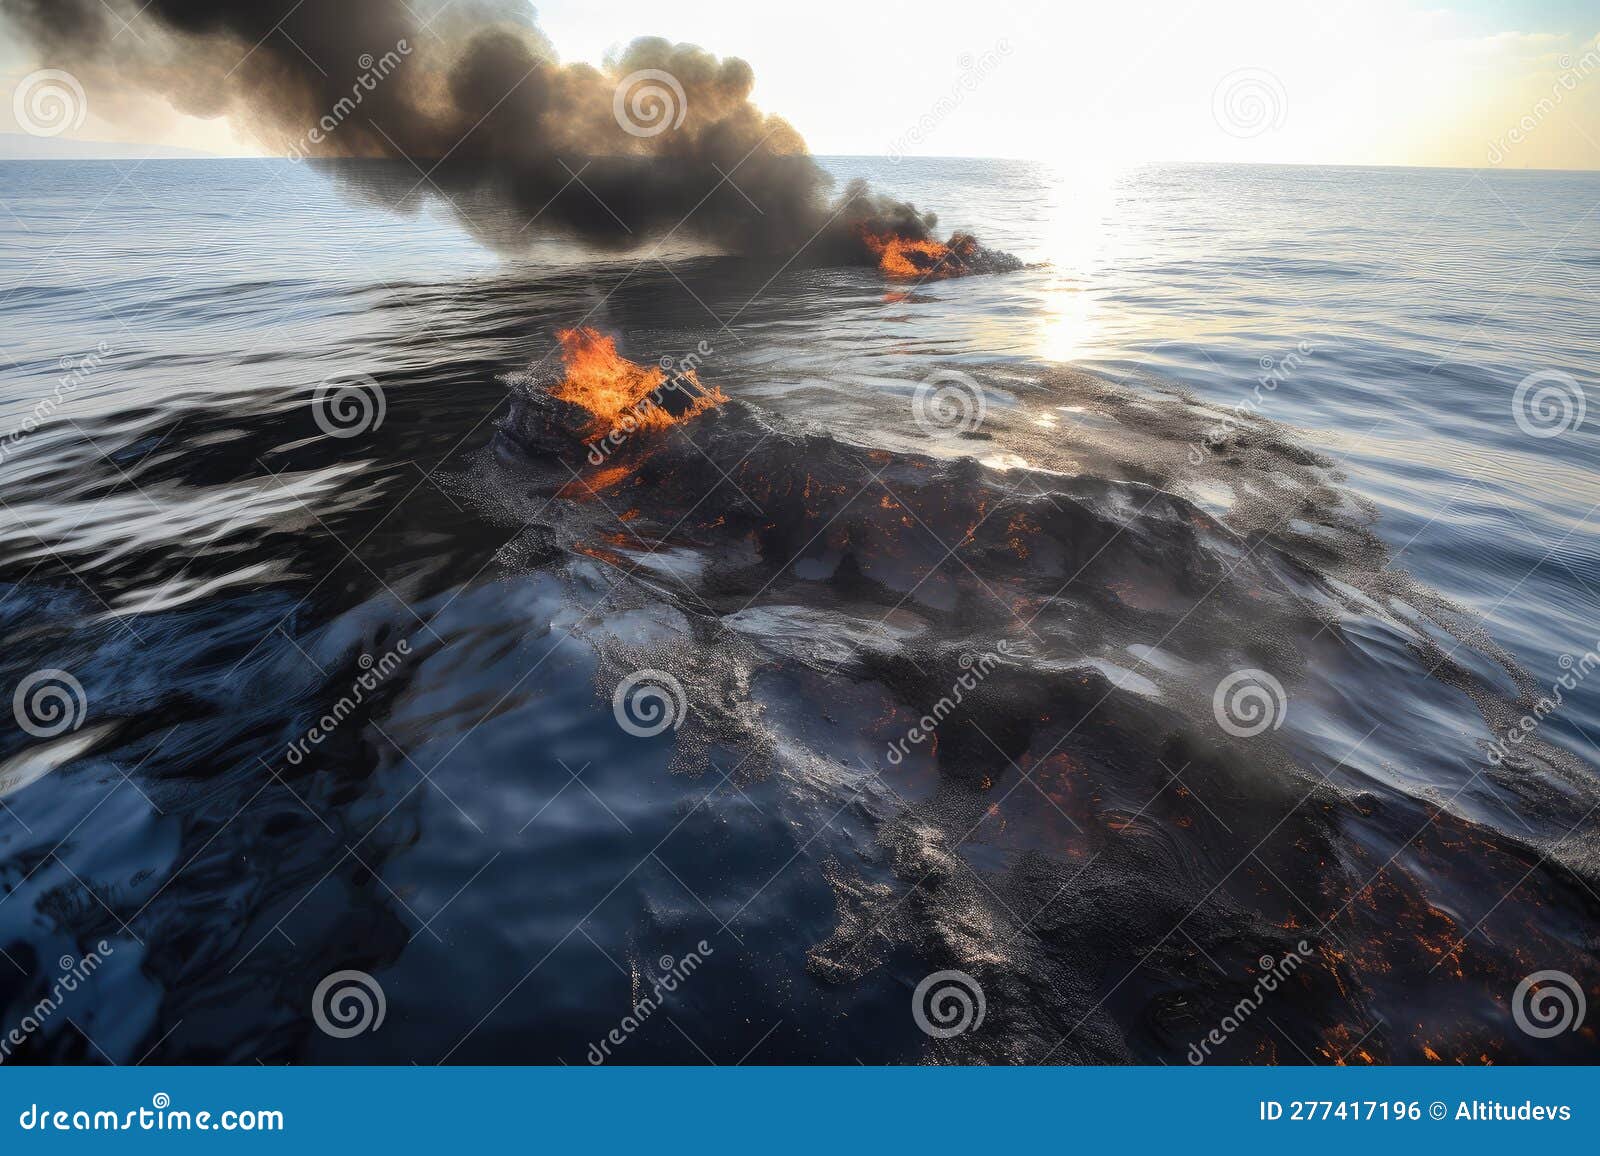 oil spill disaster on the open sea, with burning oil slicks and floating debris